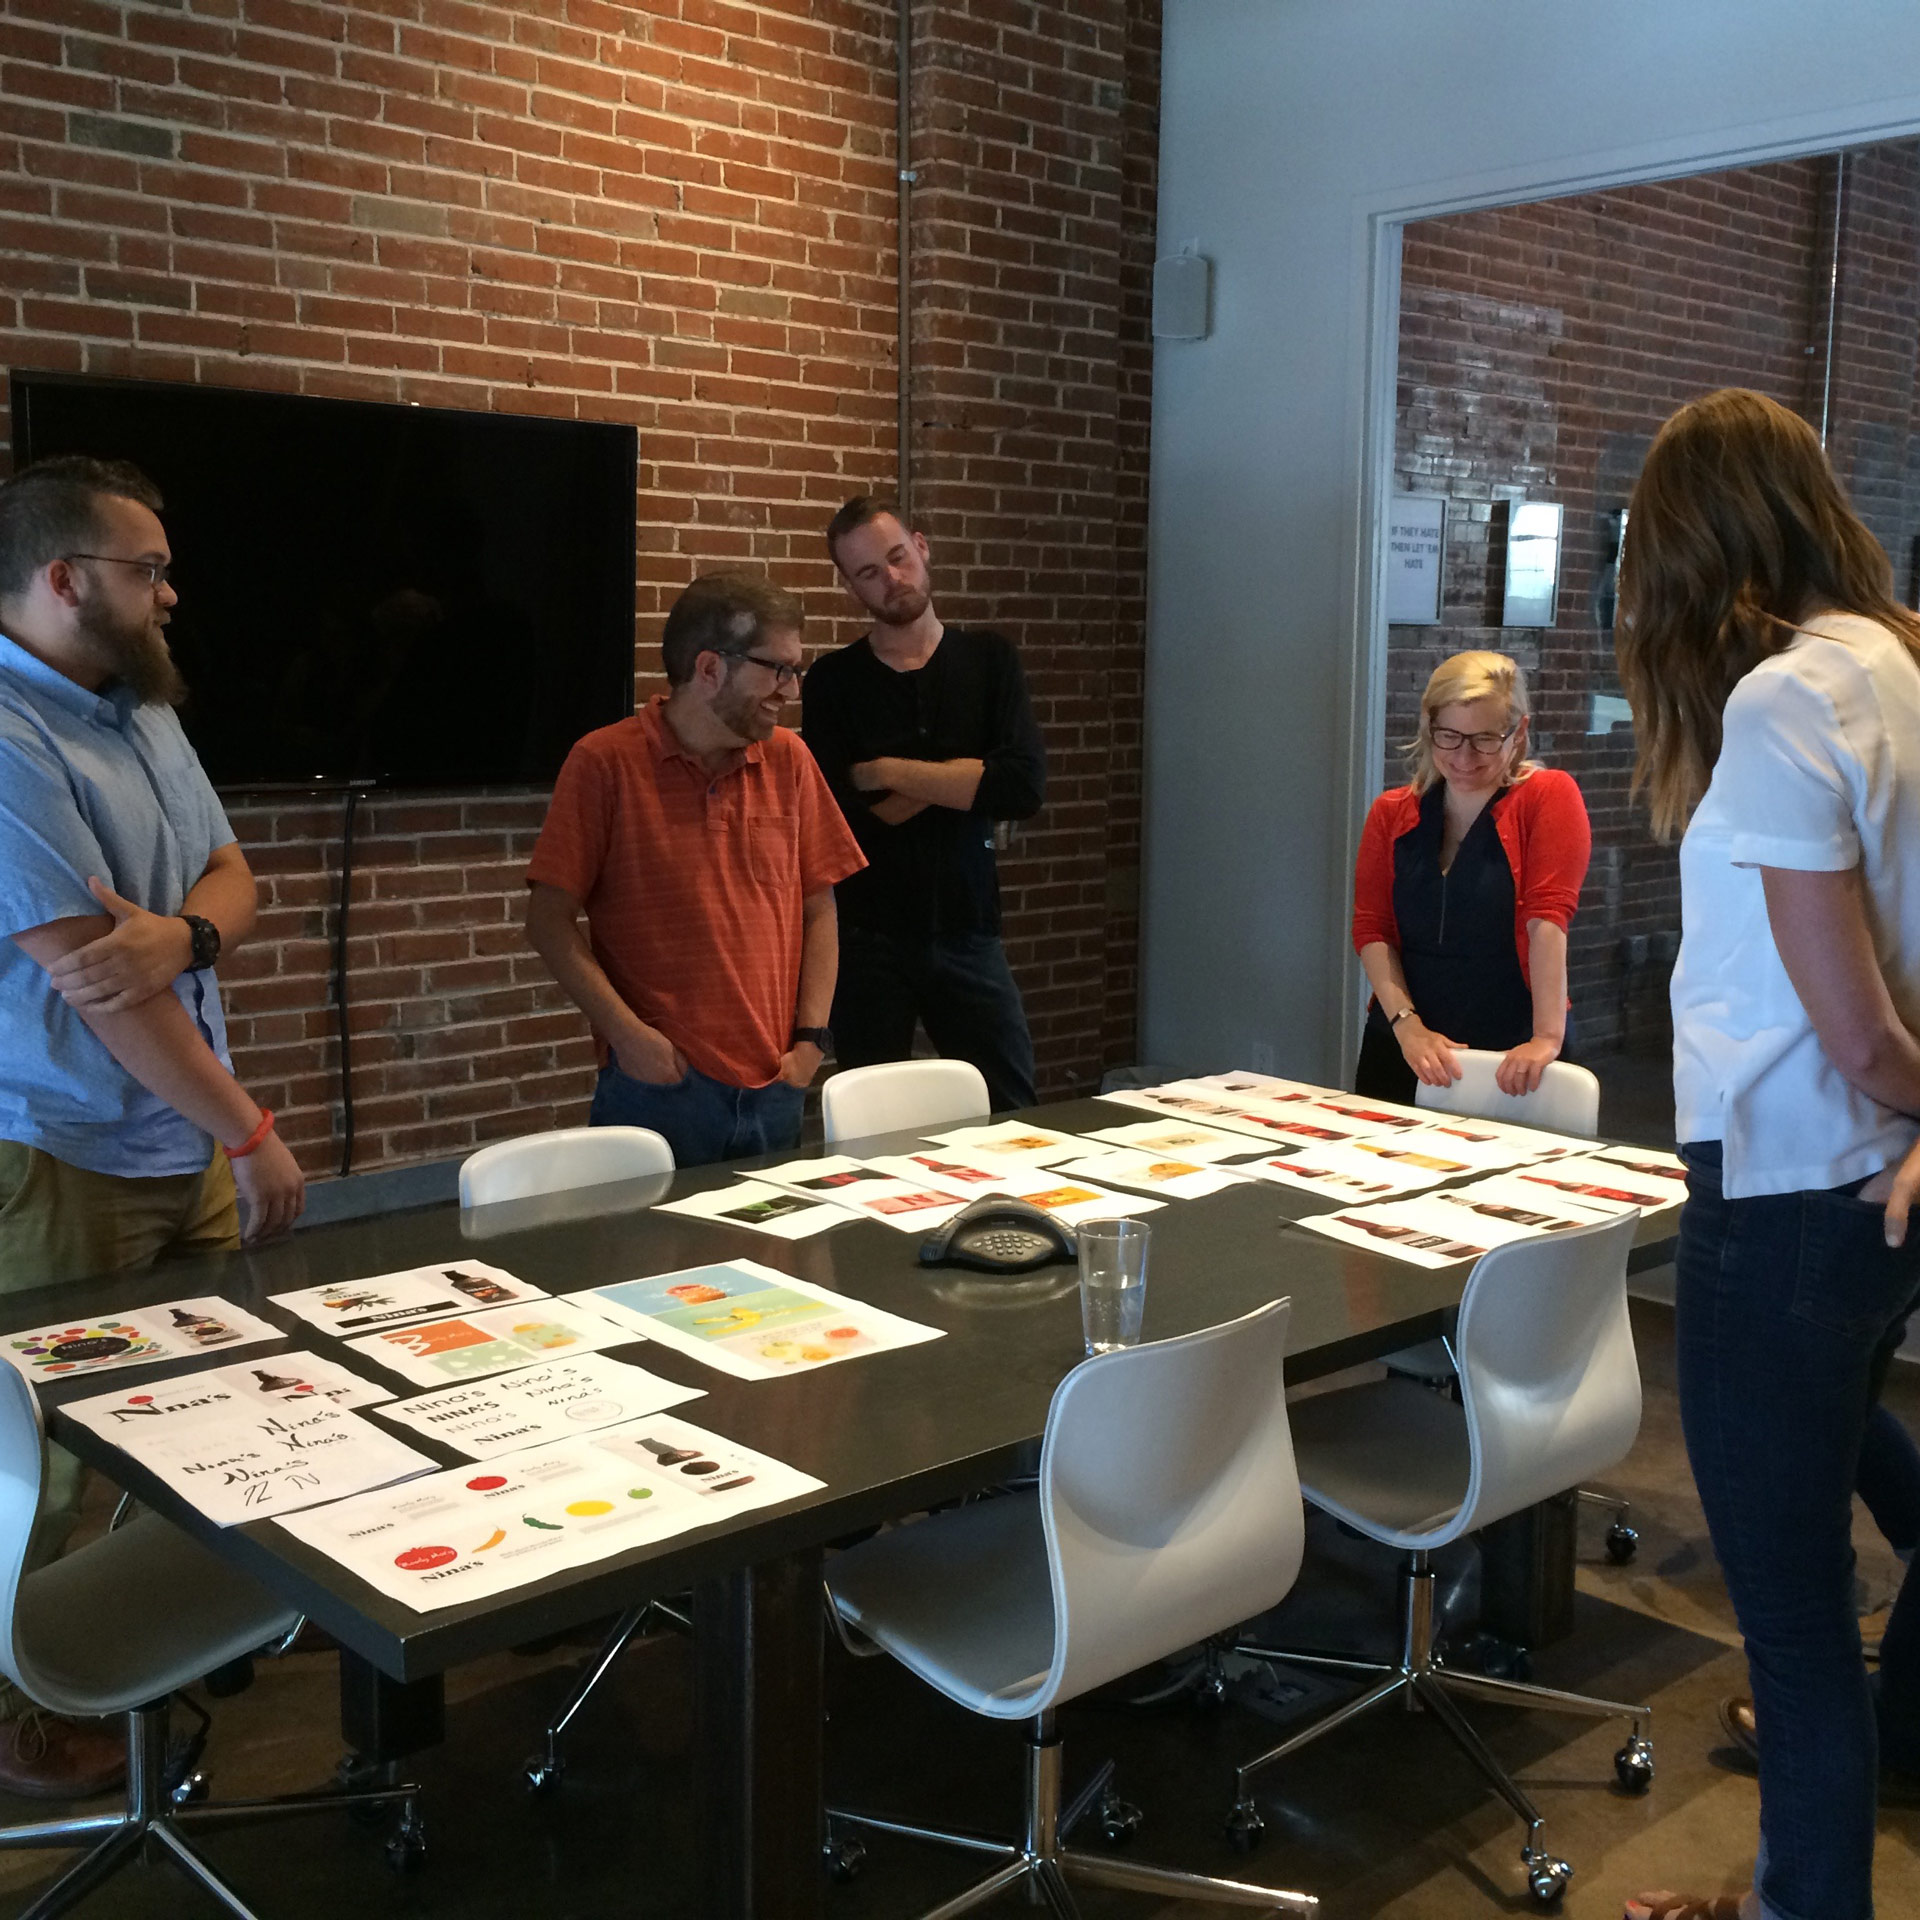 Creatives at Atomicdust Discussing the Nina's Natural Branding Concepts